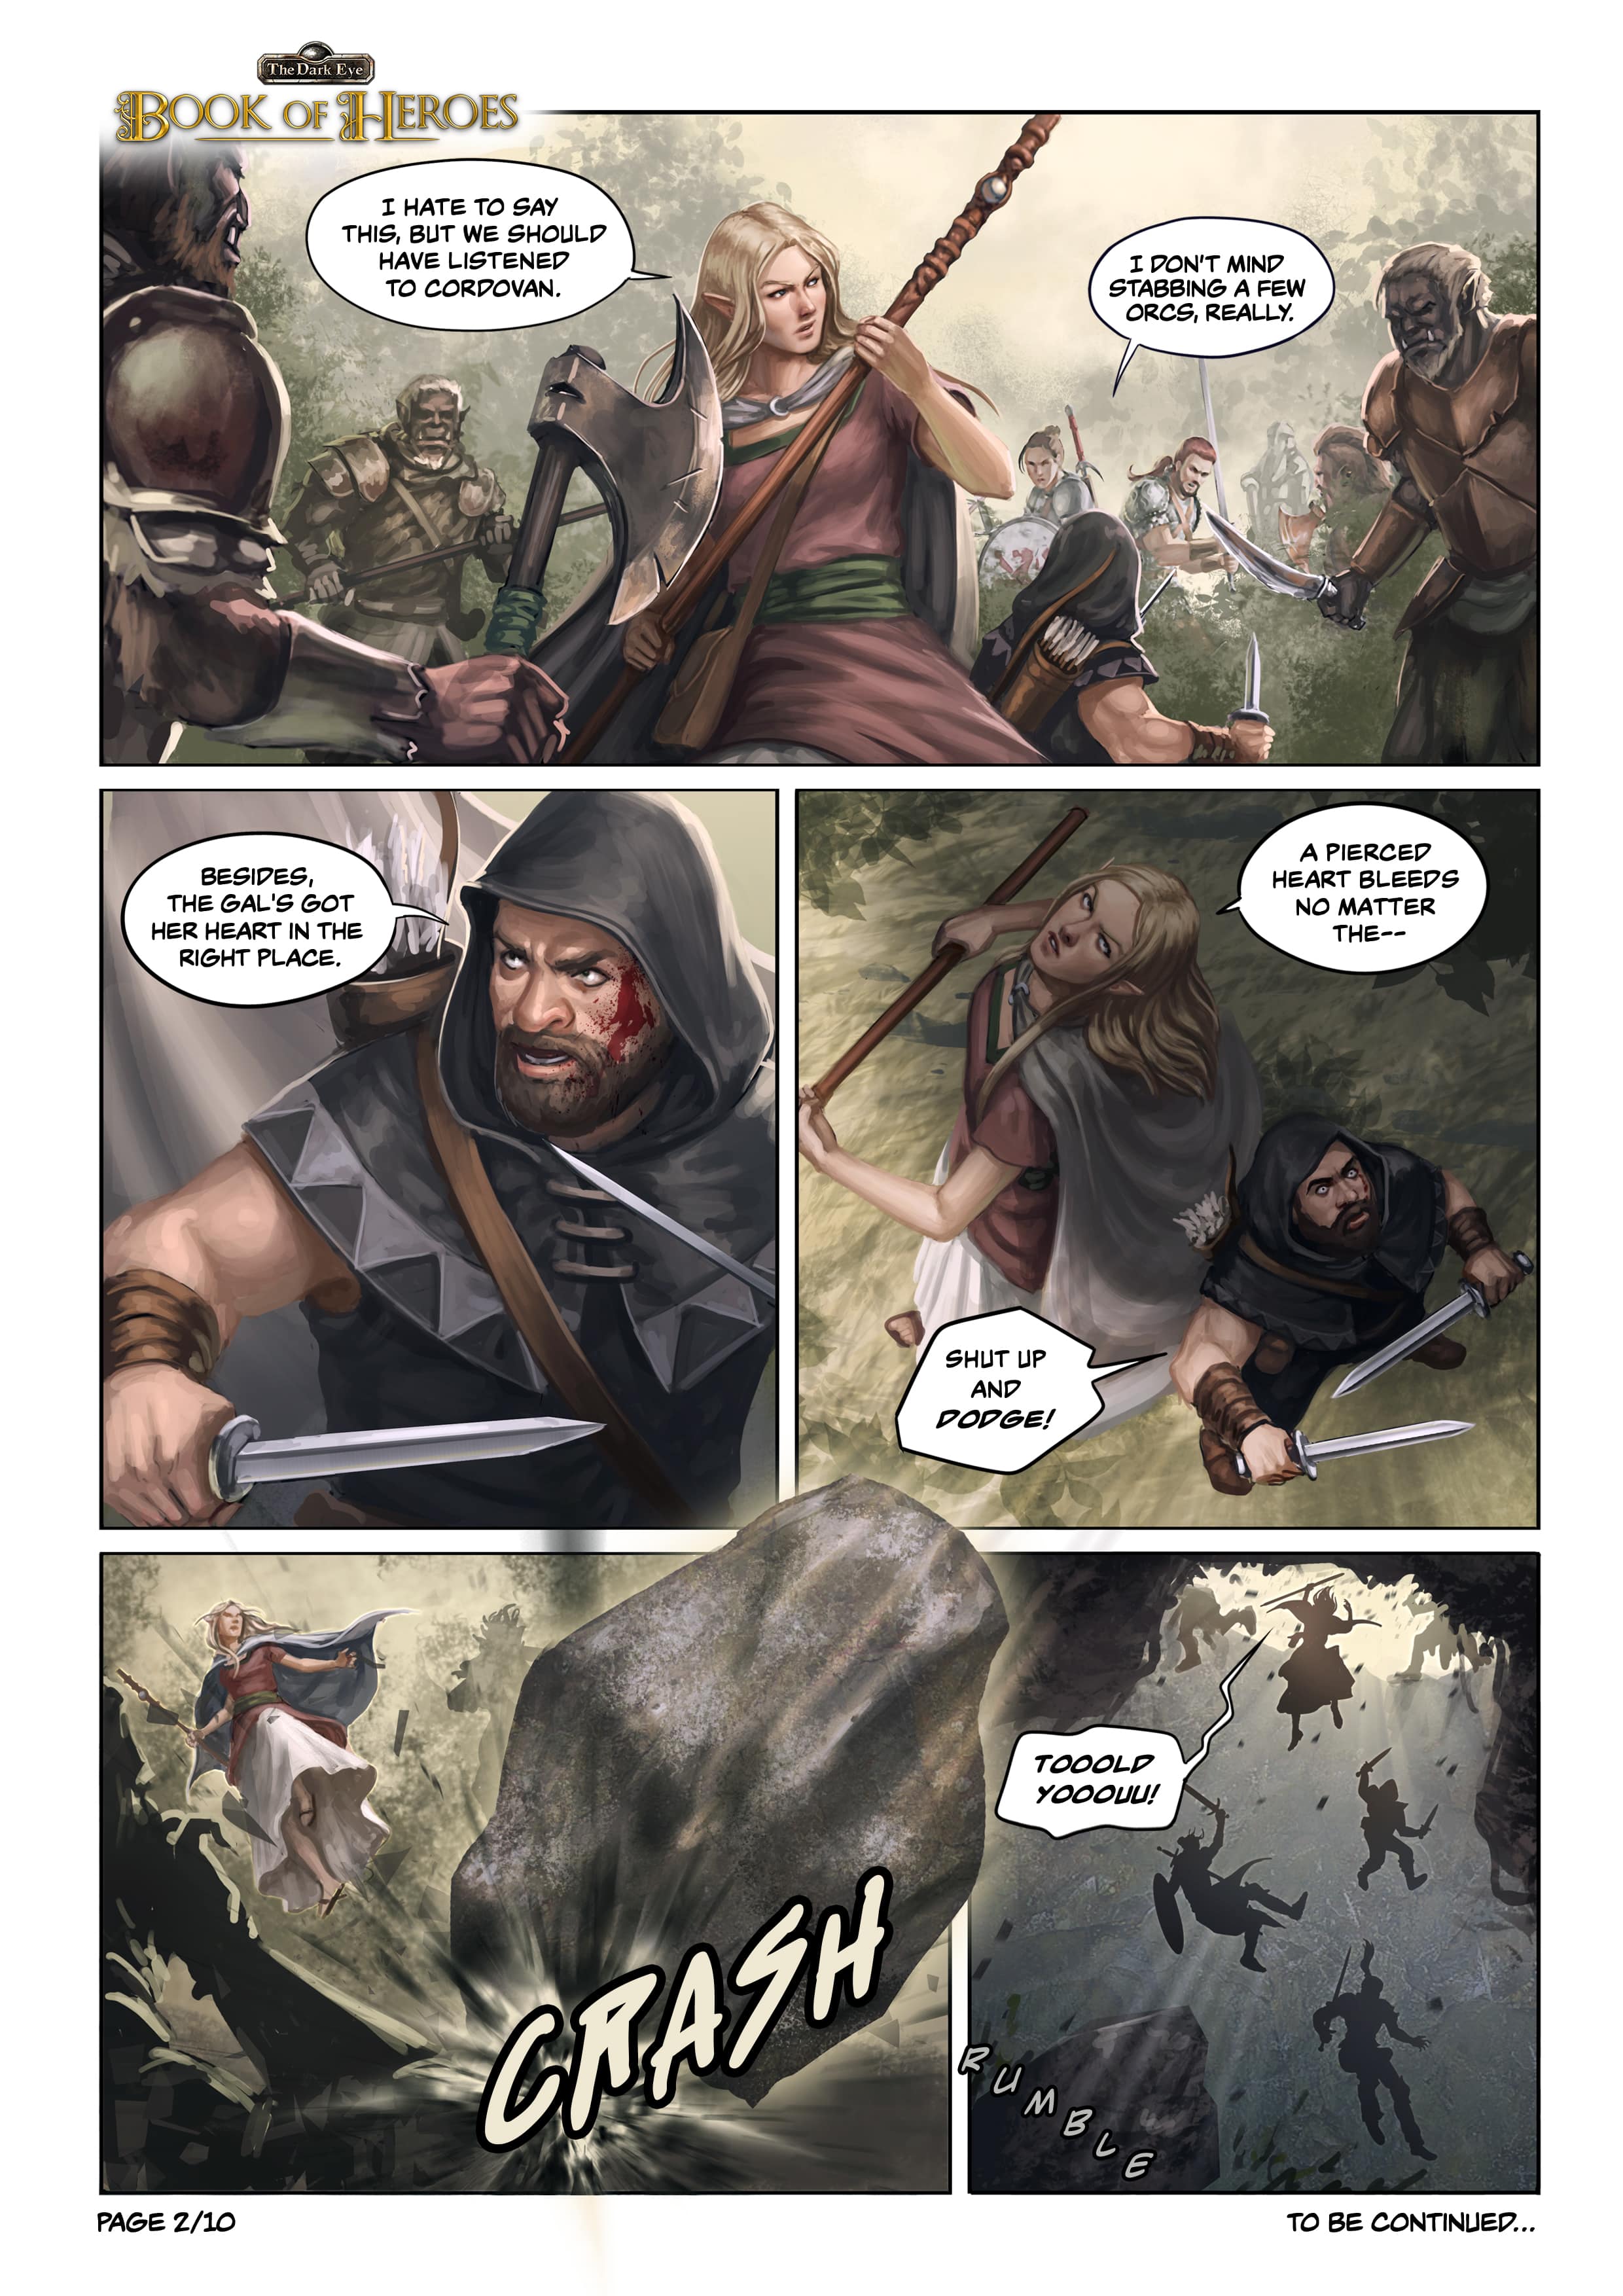 Book of Heroes Chapter 1 Page 2